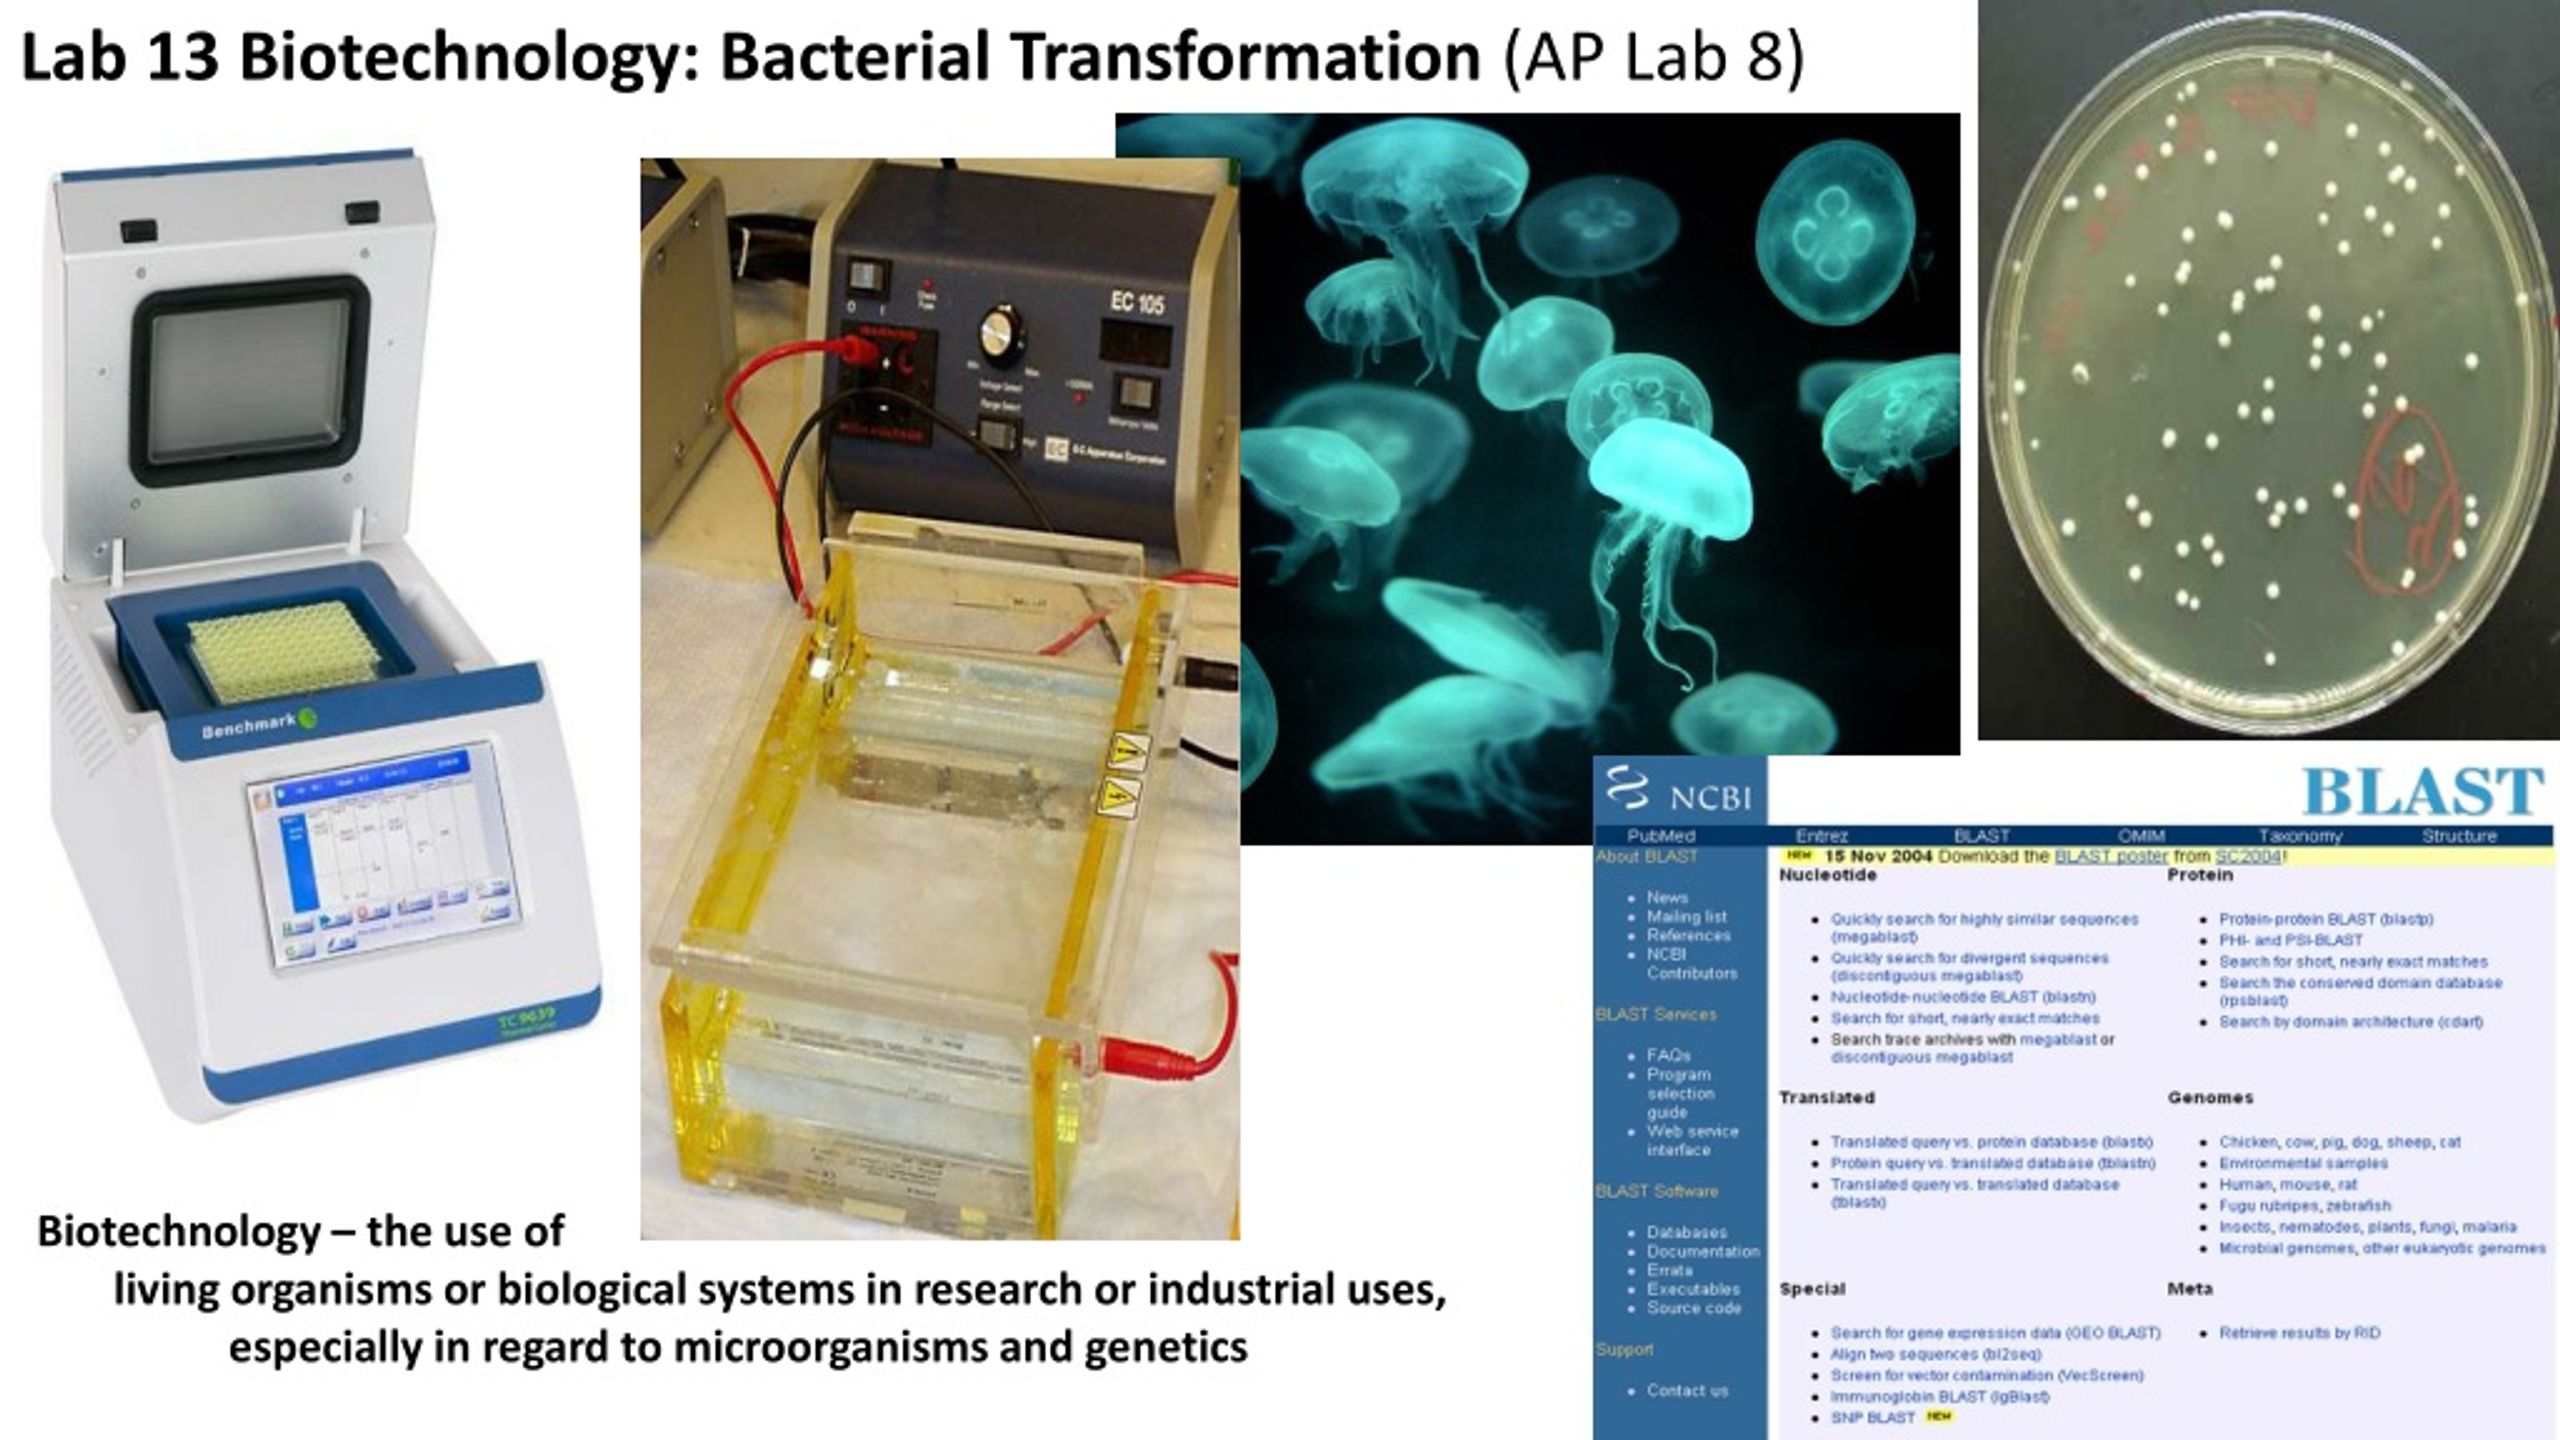 PPT Lab 13 Biotechnology Bacterial Transformation (AP Lab 8